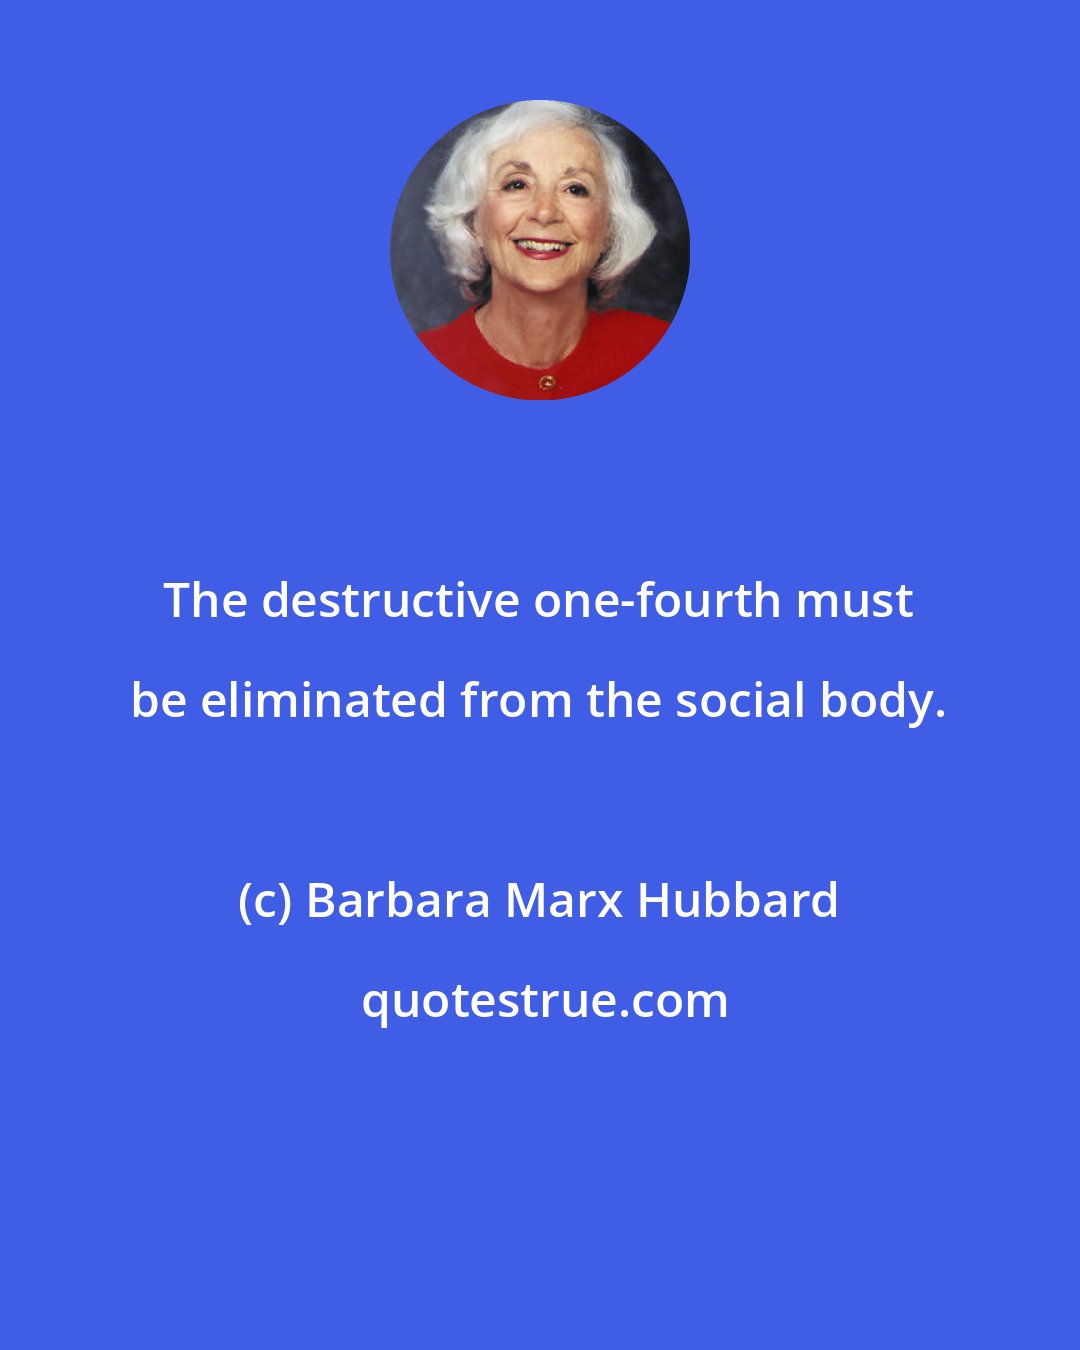 Barbara Marx Hubbard: The destructive one-fourth must be eliminated from the social body.